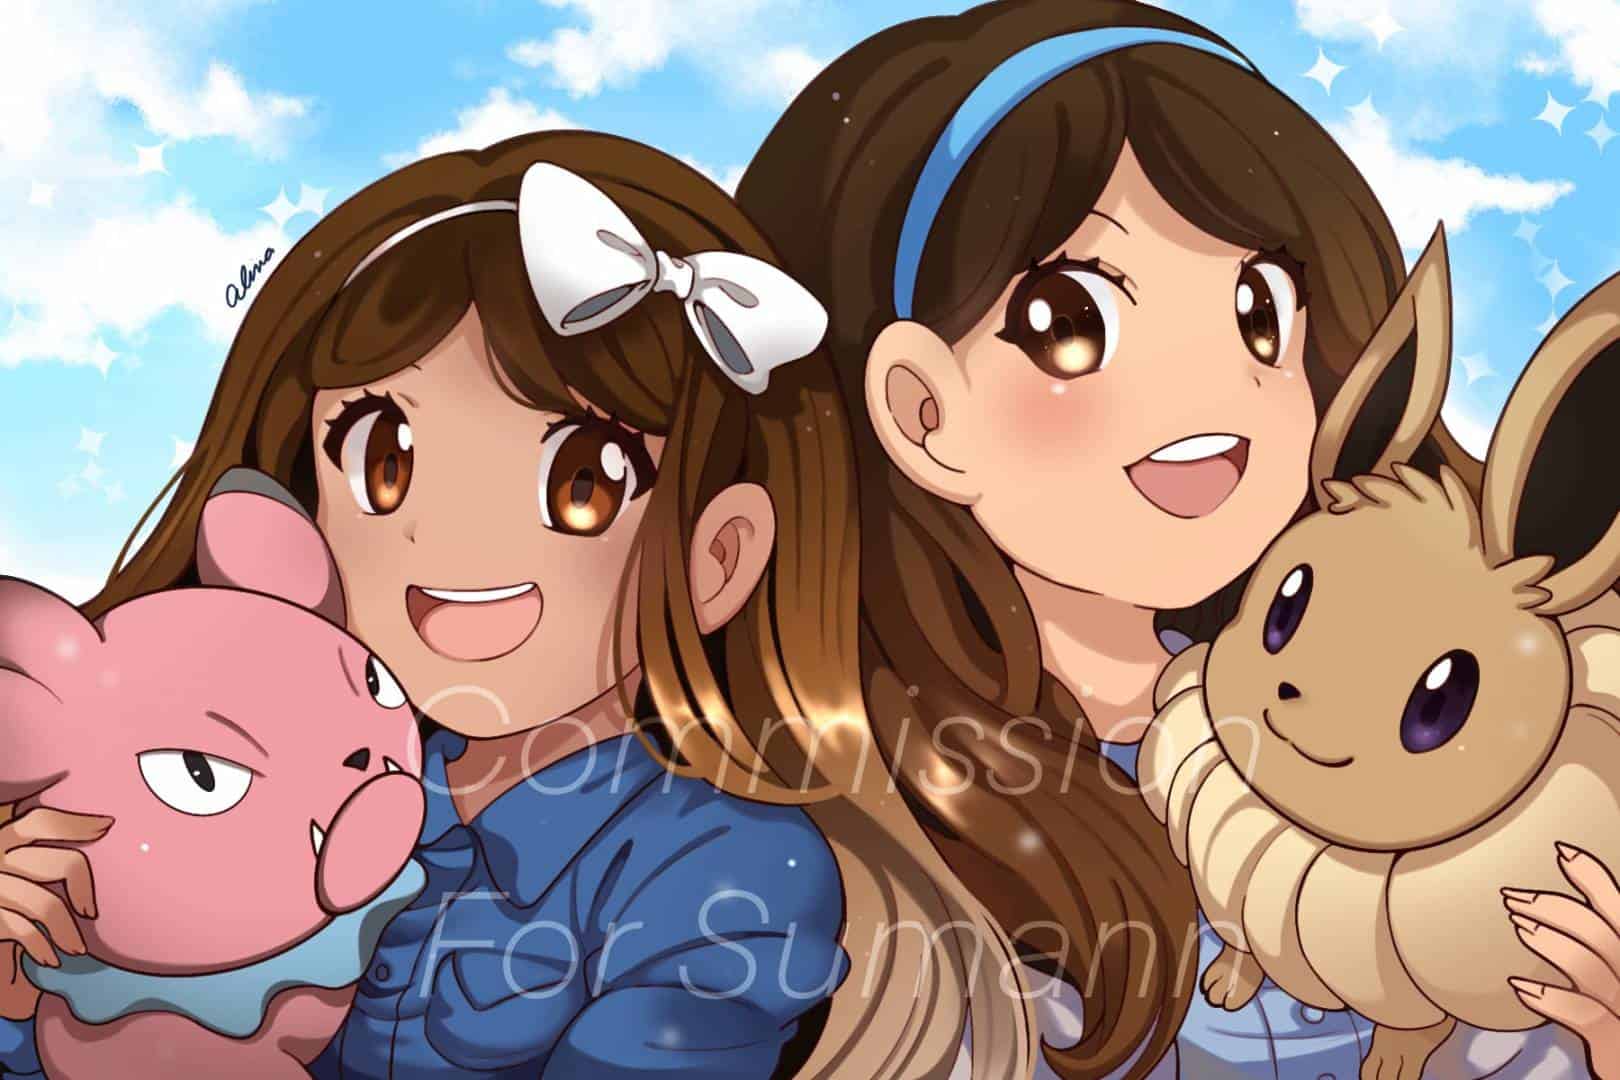 Custom Anime icon,Avatar for your profile pic Art Commission